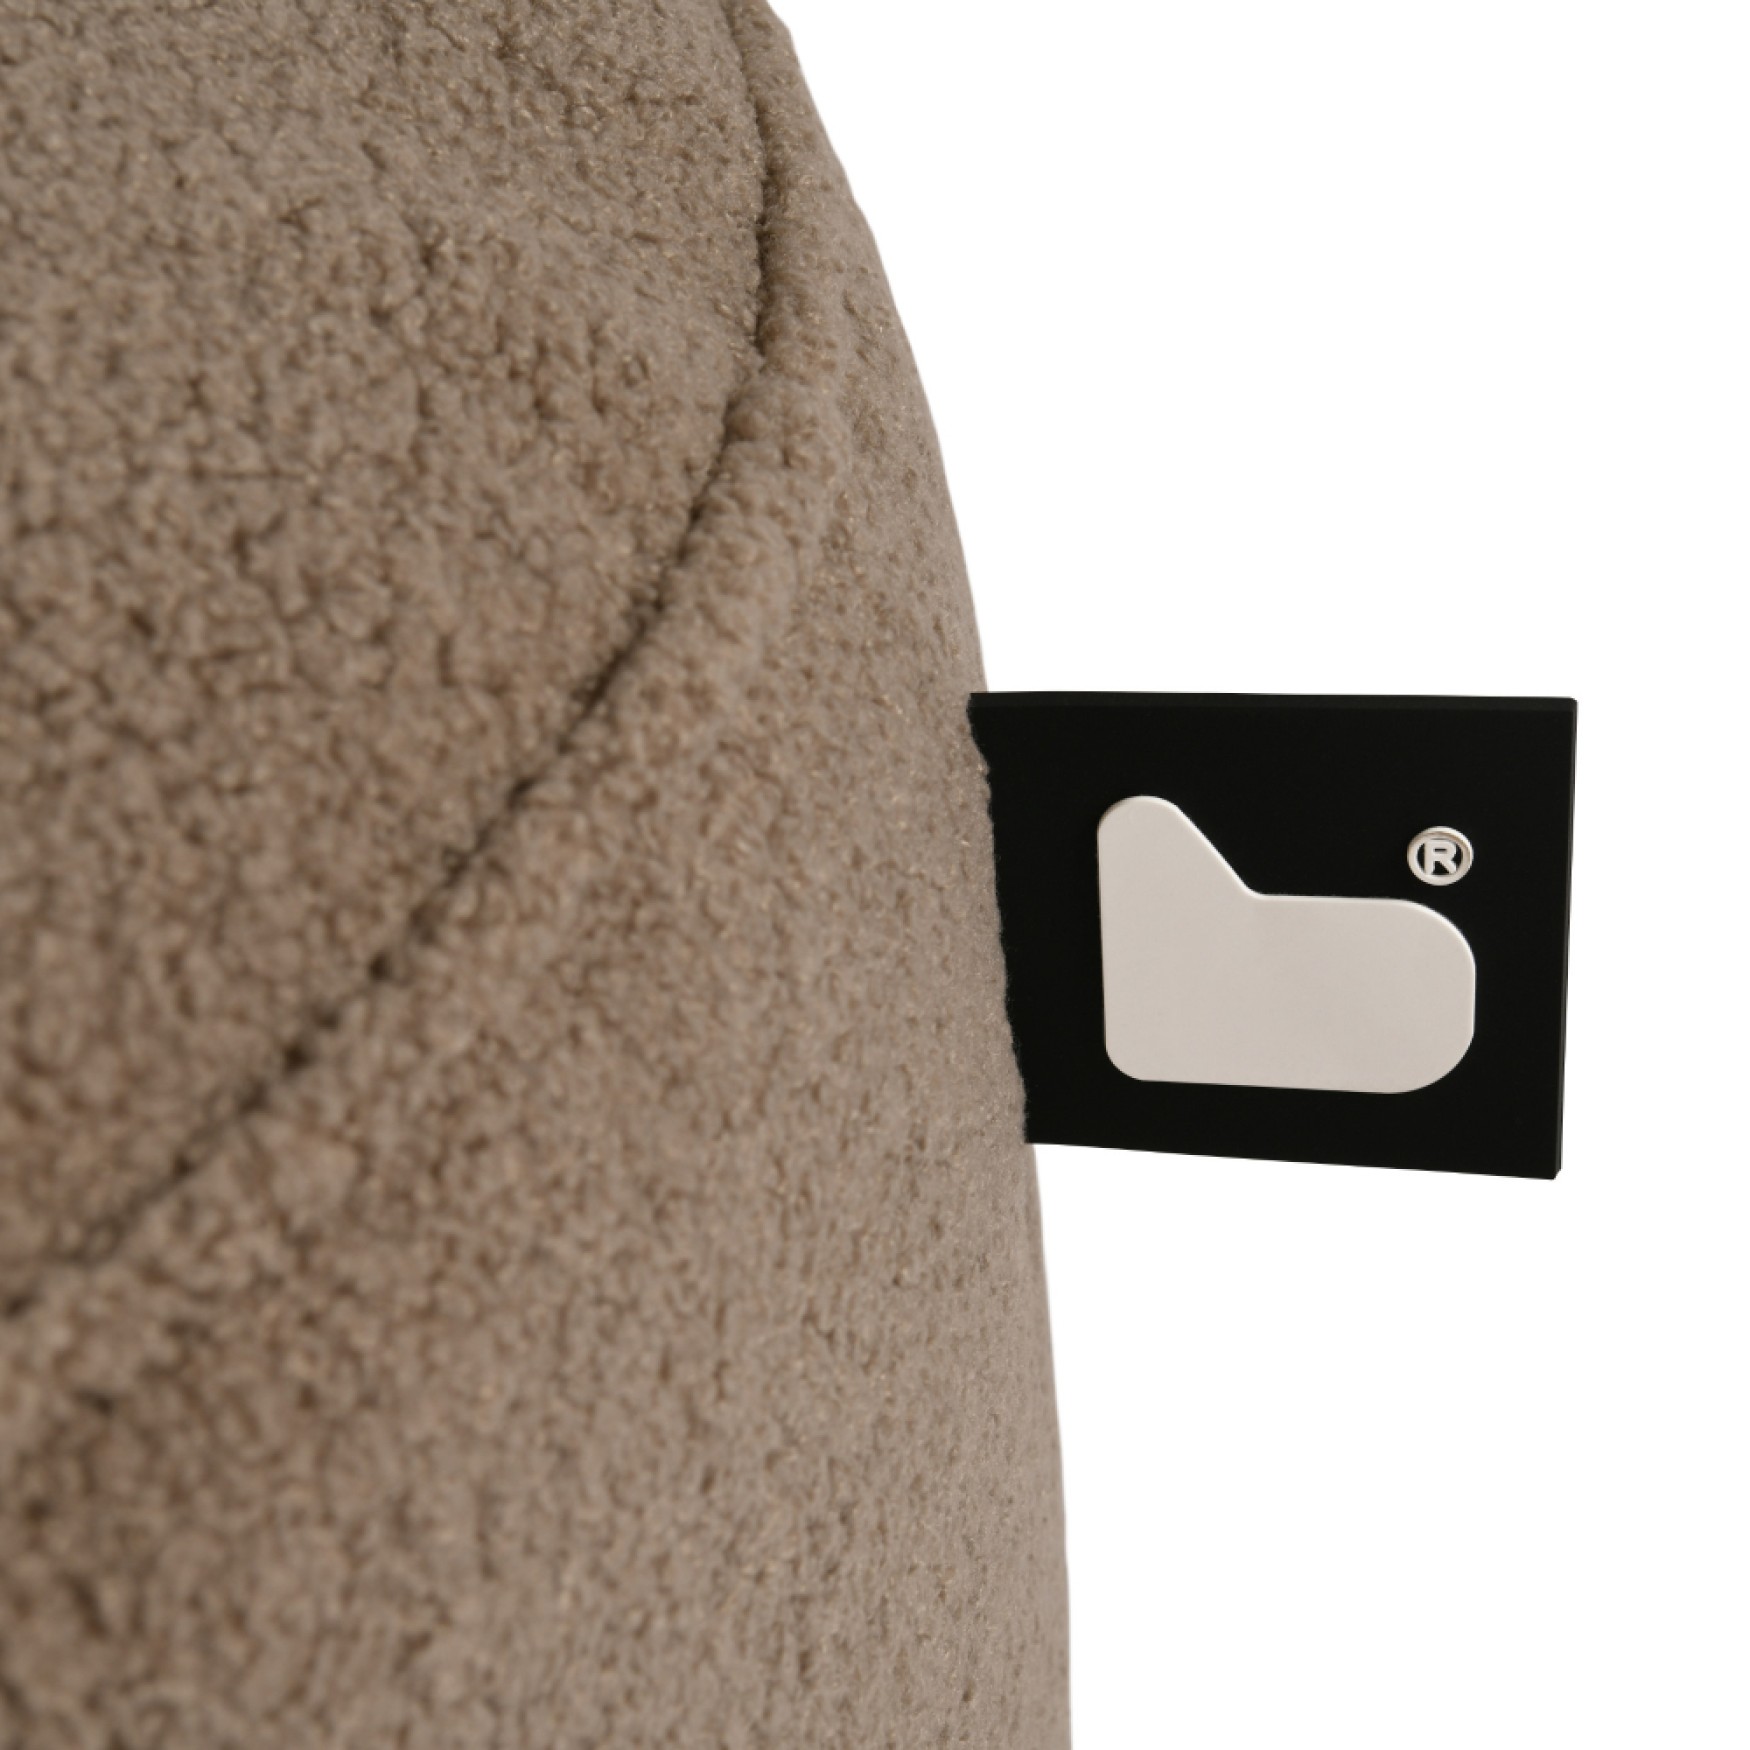 extreme lounging bpouffe indoor teddy mink